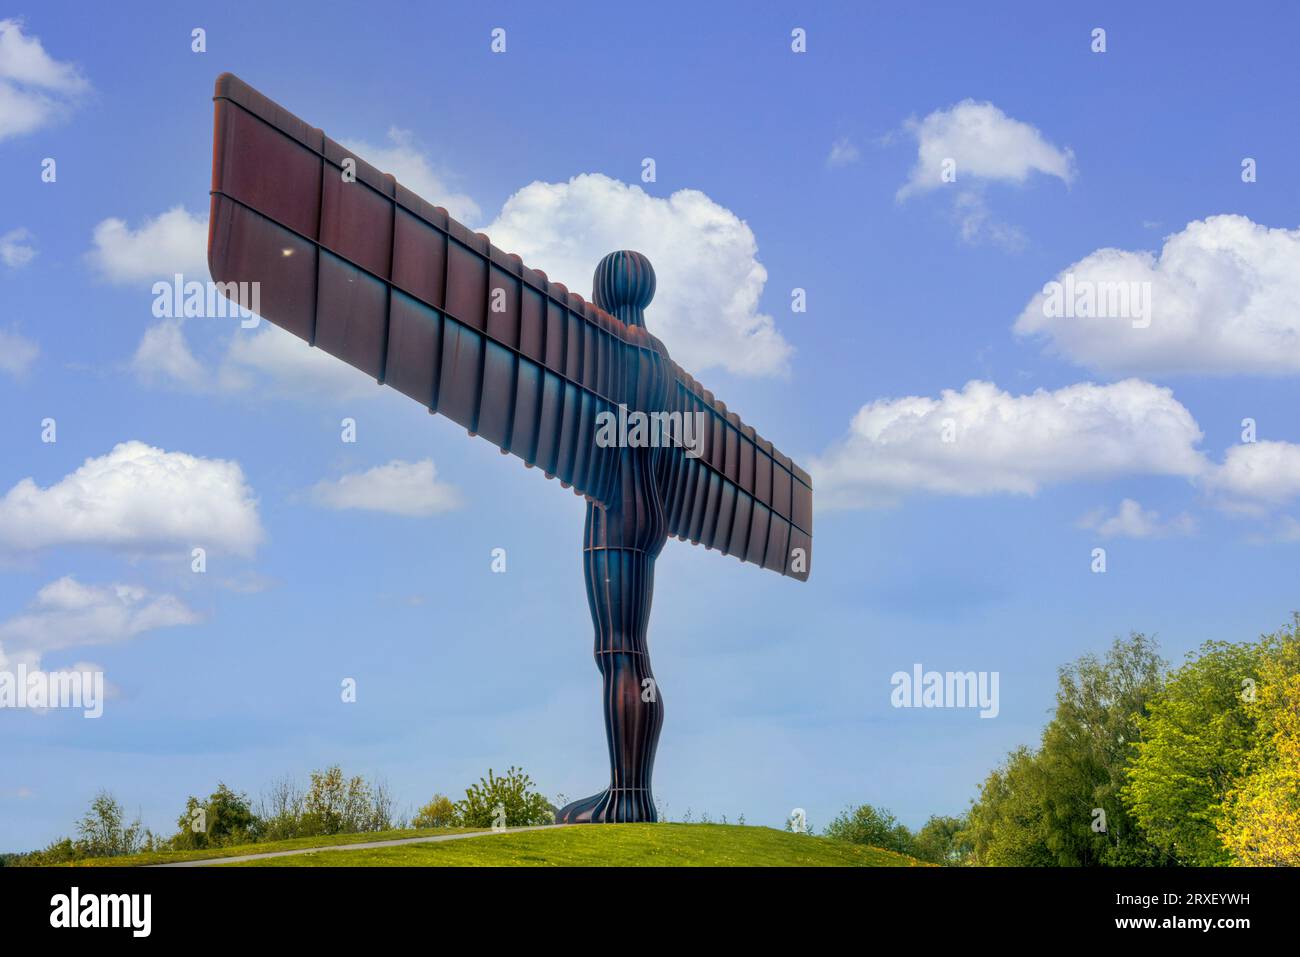 The largest Angel sculpture of the world: Angel of the North in Tyne and Wear, England, United Kingdom Stock Photo